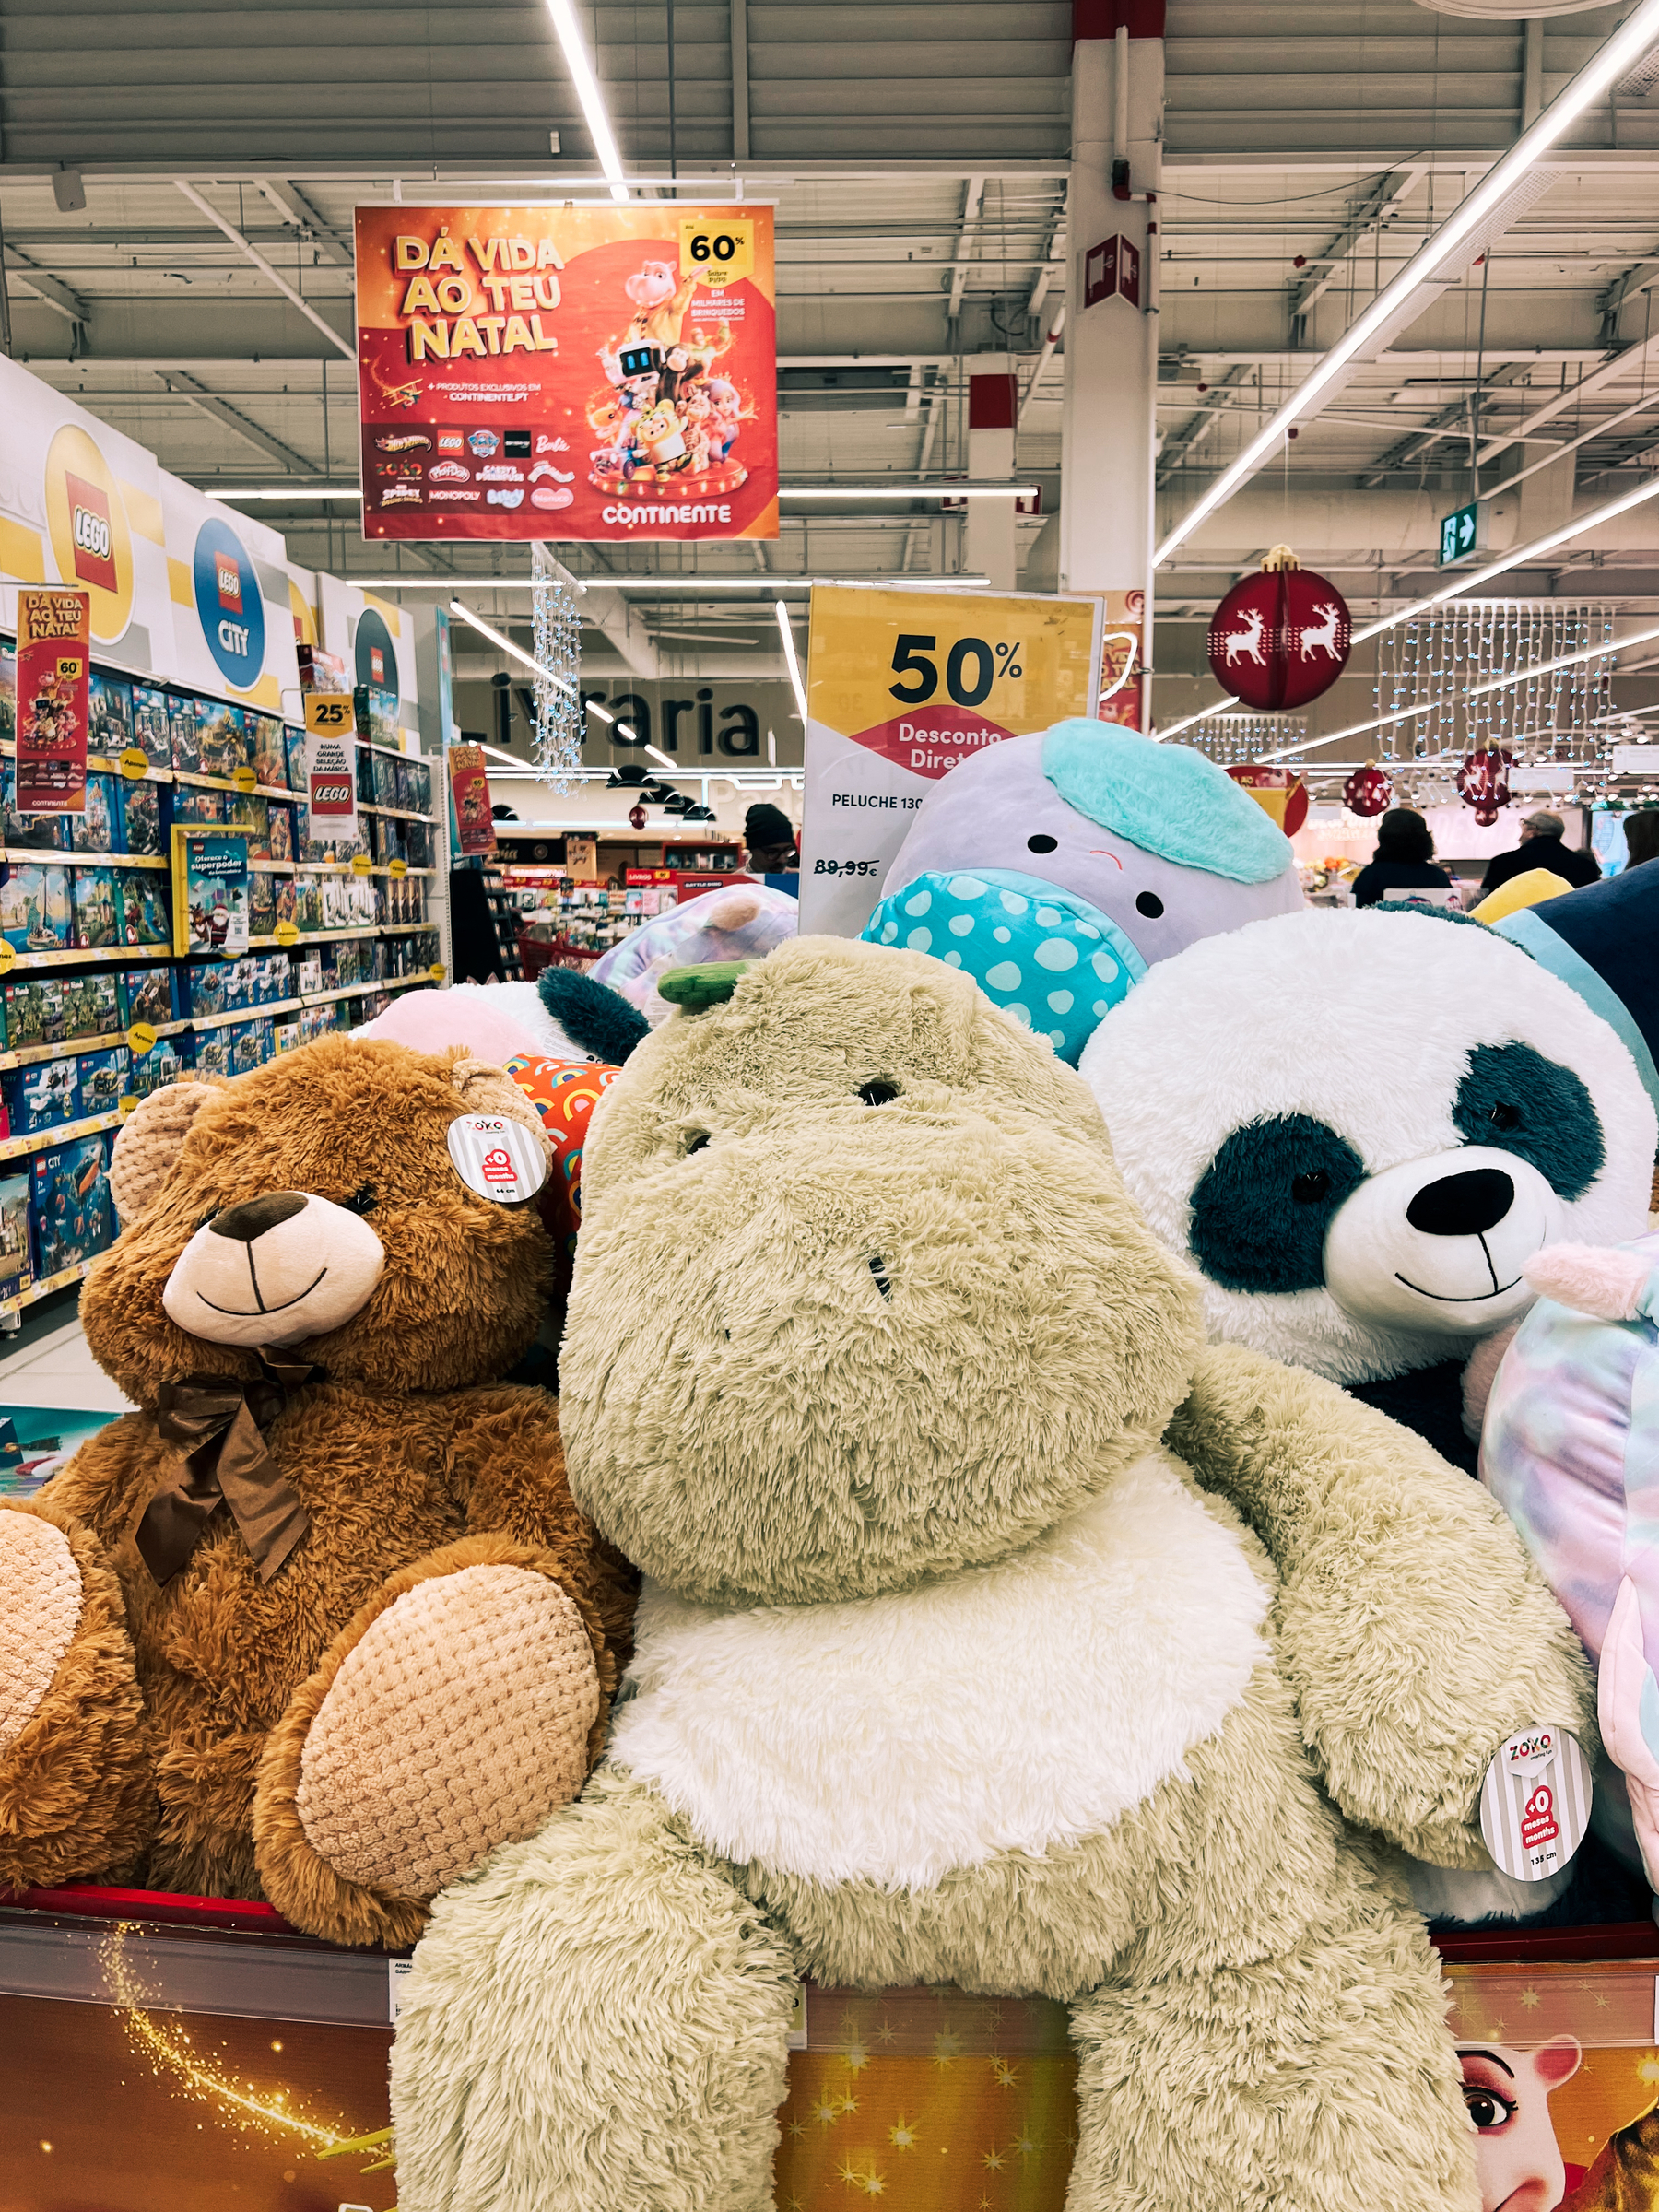 A selection of large plush teddy bears in a store, with a promotional sign advertising a 50% discount. The store appears to be decorated for a holiday season with banners and hanging decorations in the background.